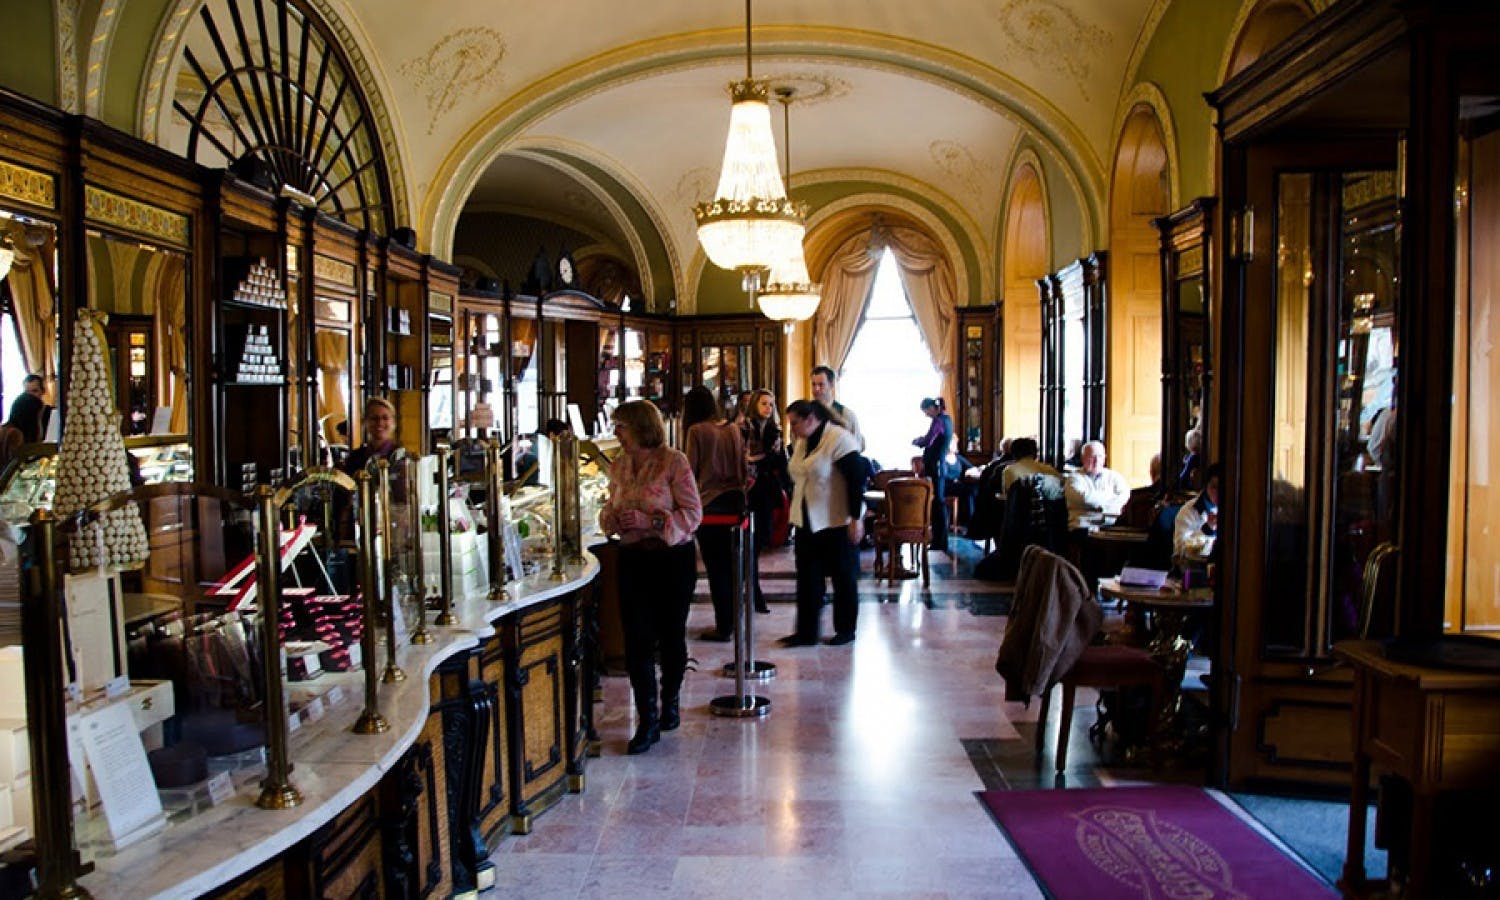 Cafe Wandering with a Historian: An Excursion through the Literature and History of Budapest